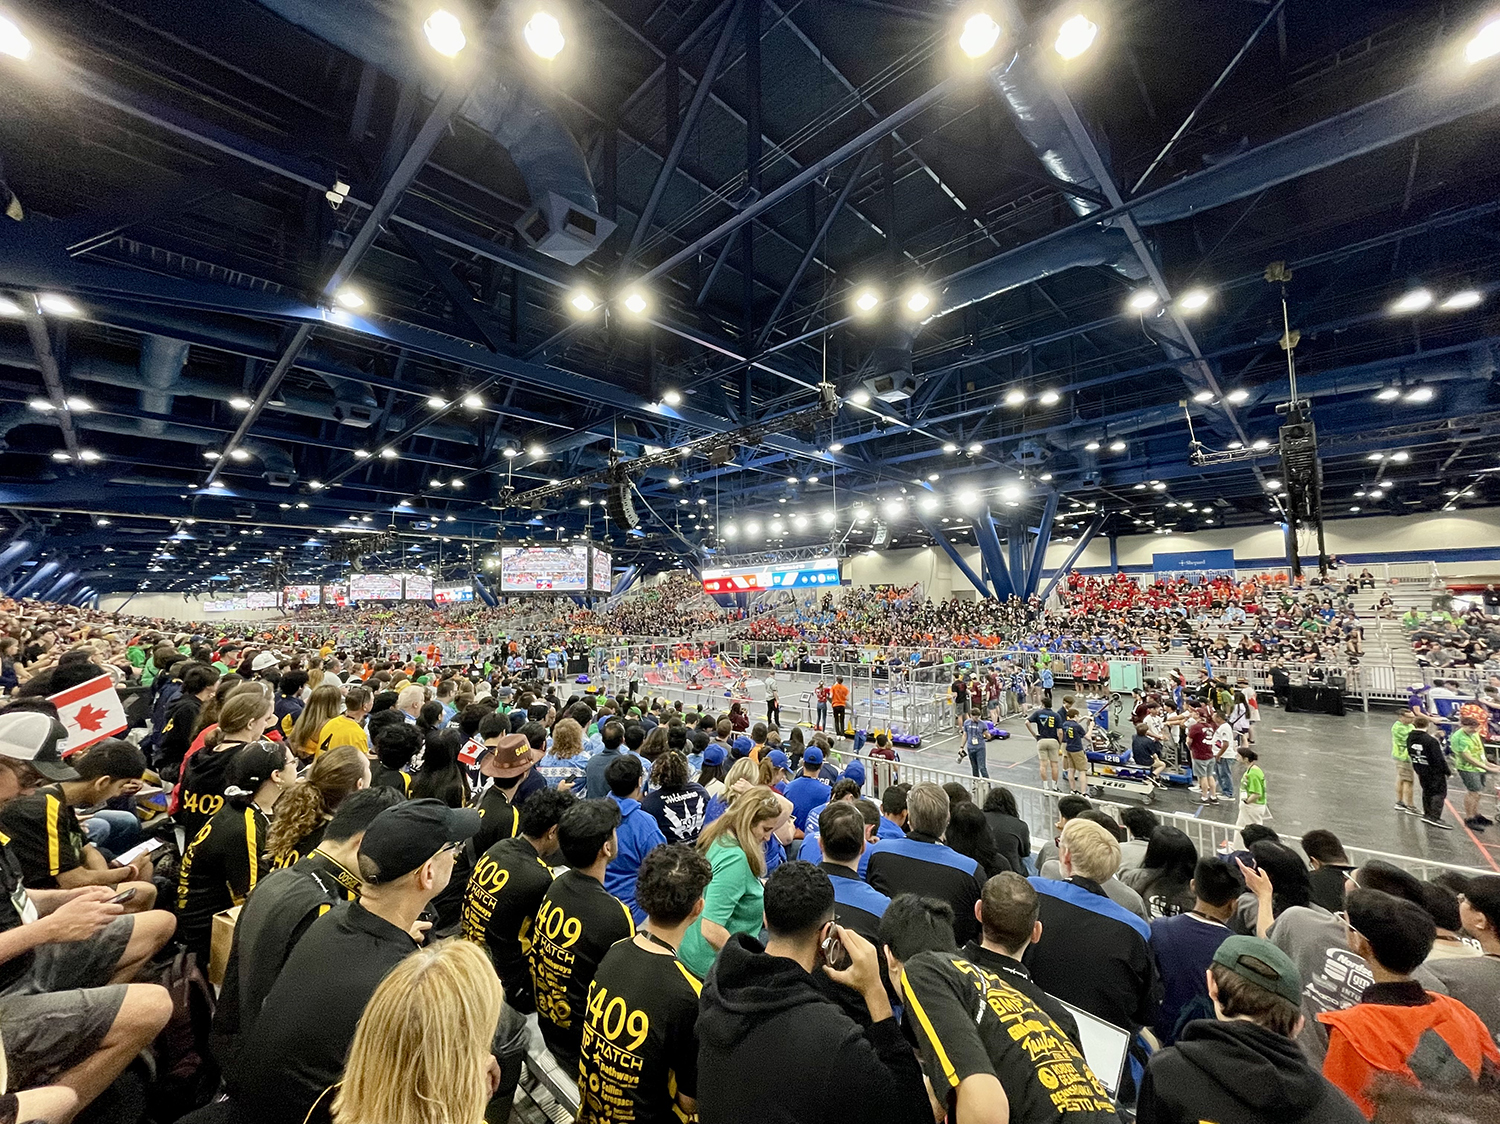 The FIRST® Robotics competition is a global program that brings together students, parents, teachers, mentors and experts in science, technology, engineering and mathematics (STEM).